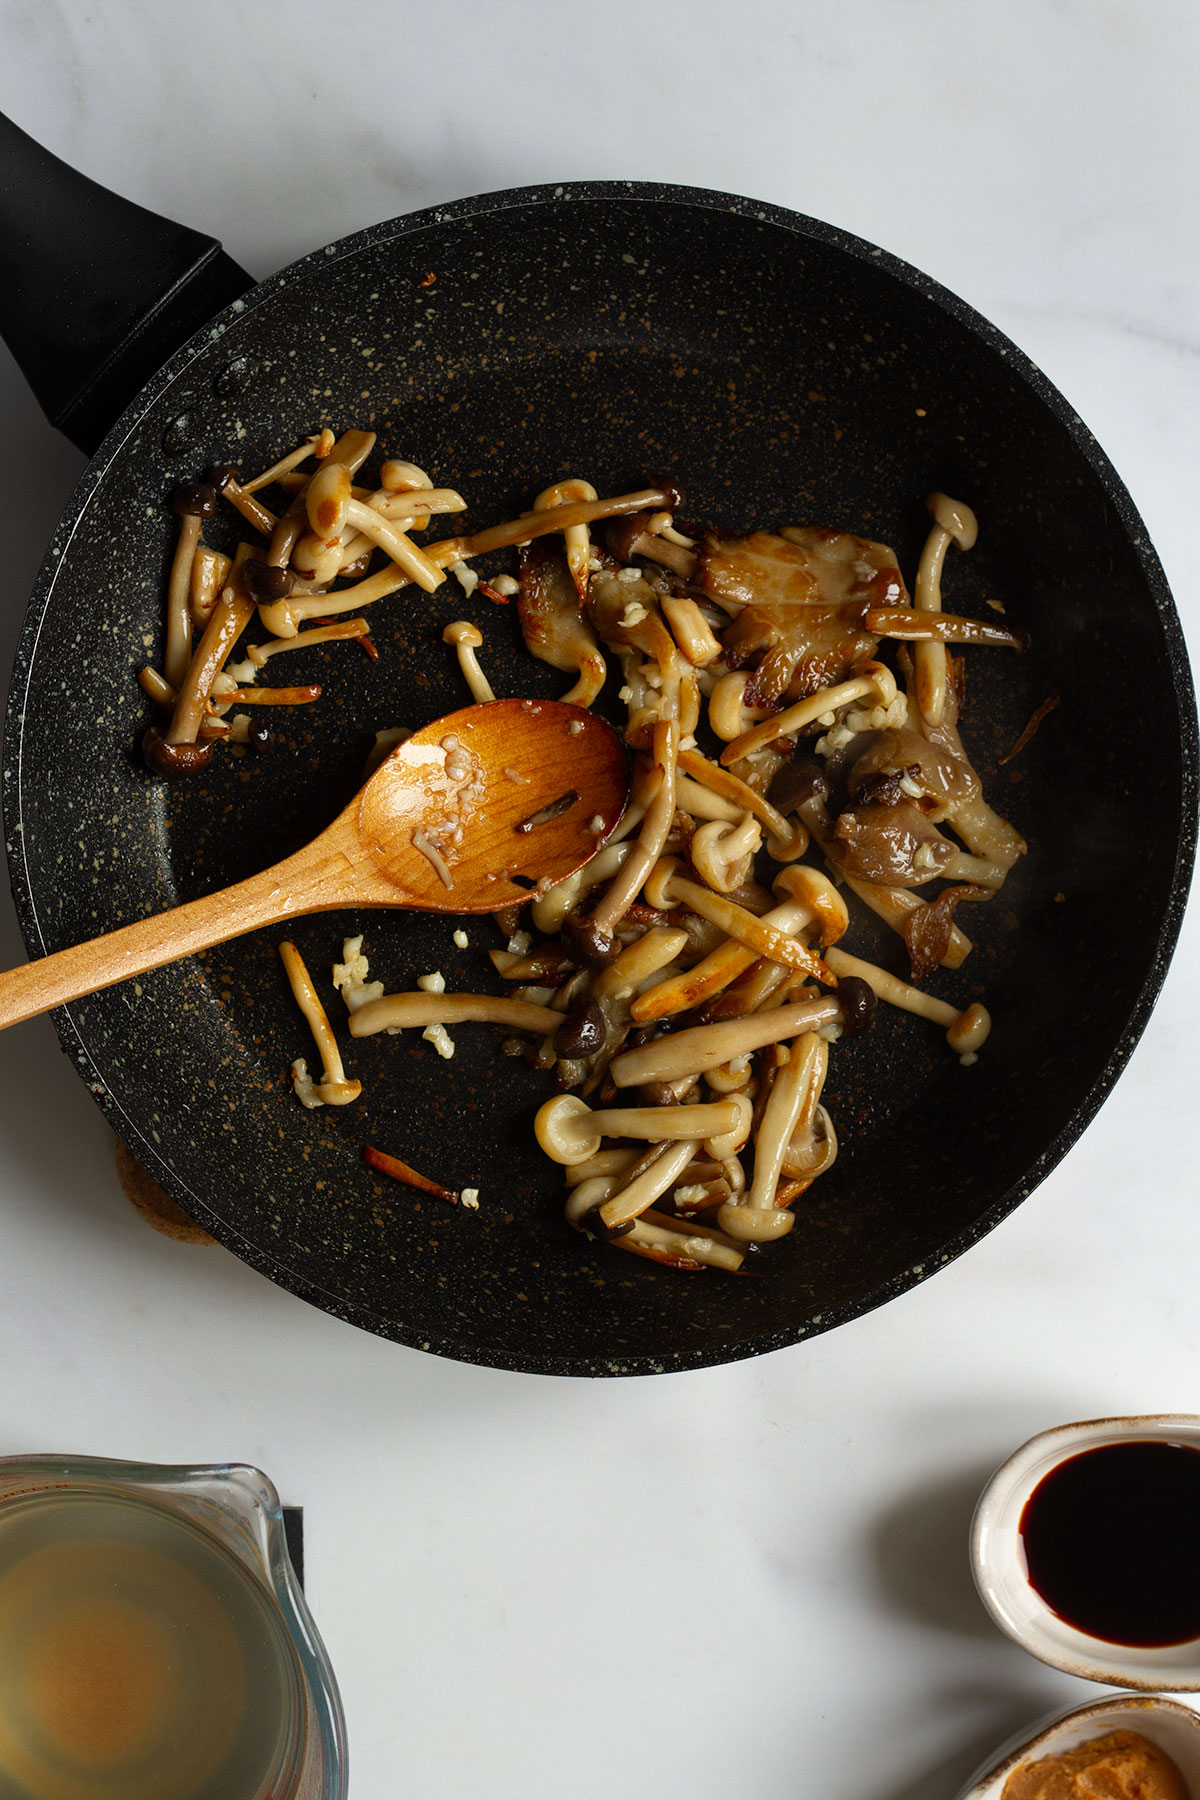 A skillet of sauteed mushrooms on a white background.